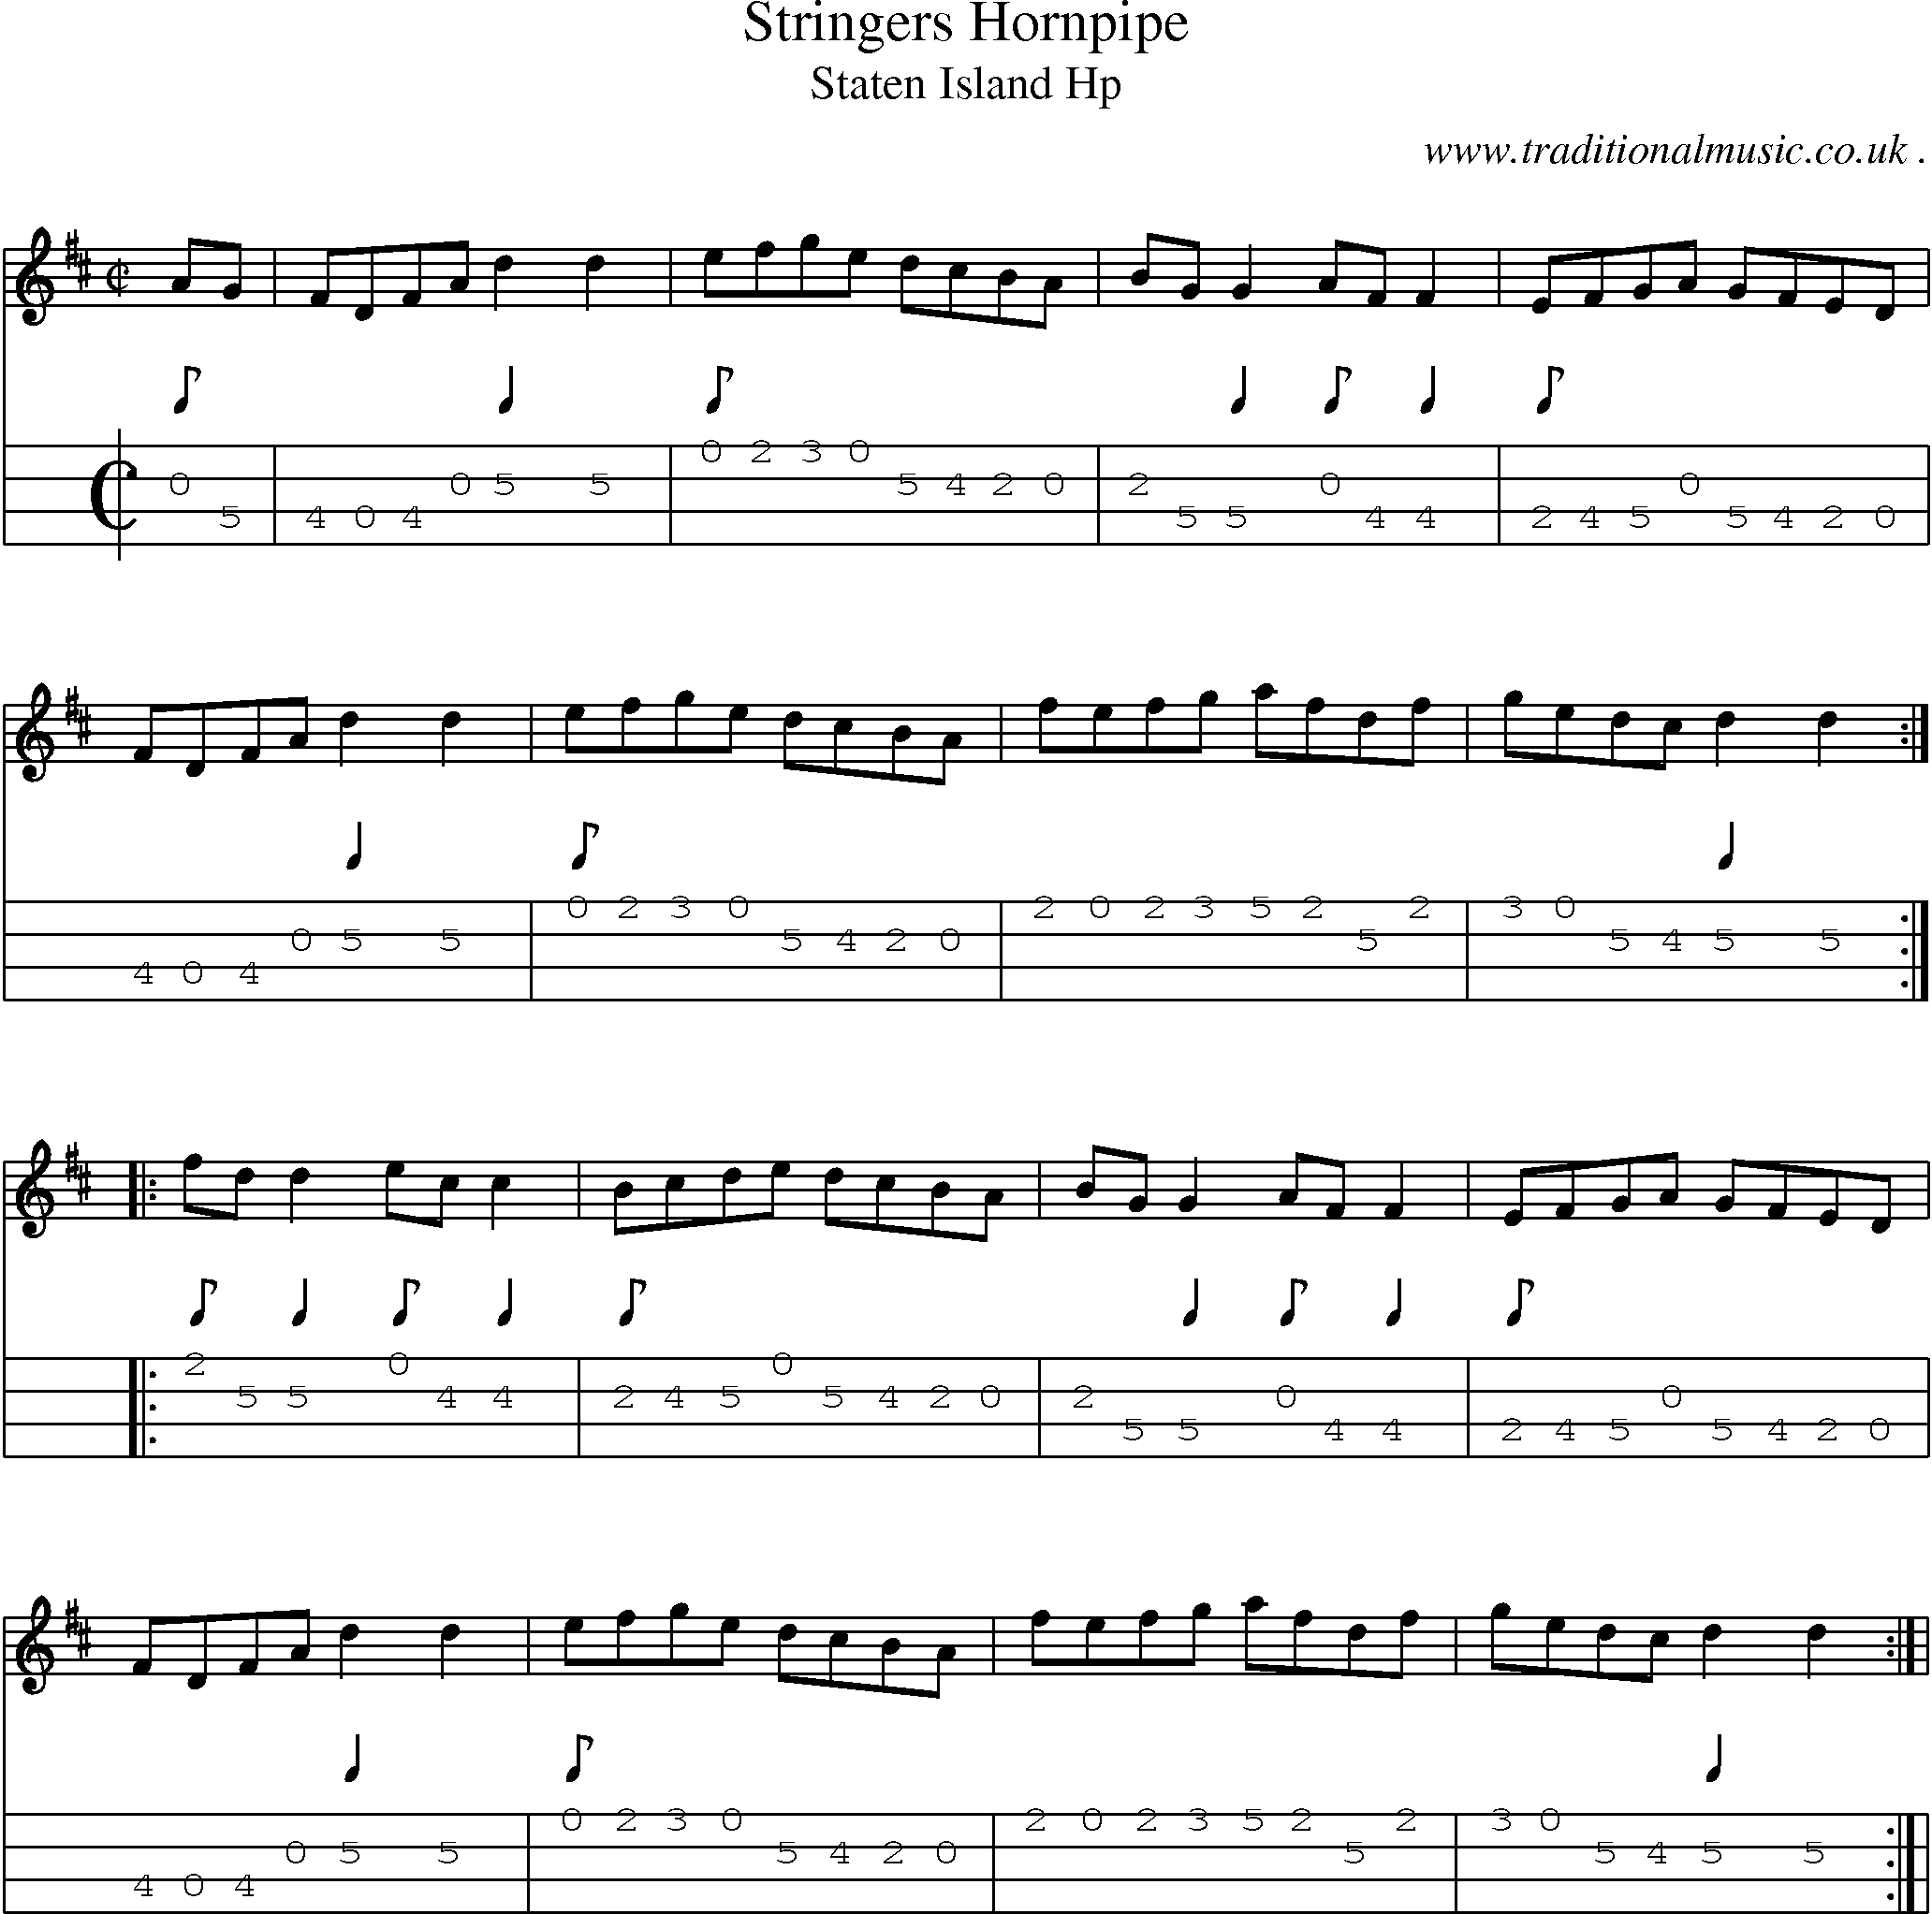 Sheet-Music and Mandolin Tabs for Stringers Hornpipe